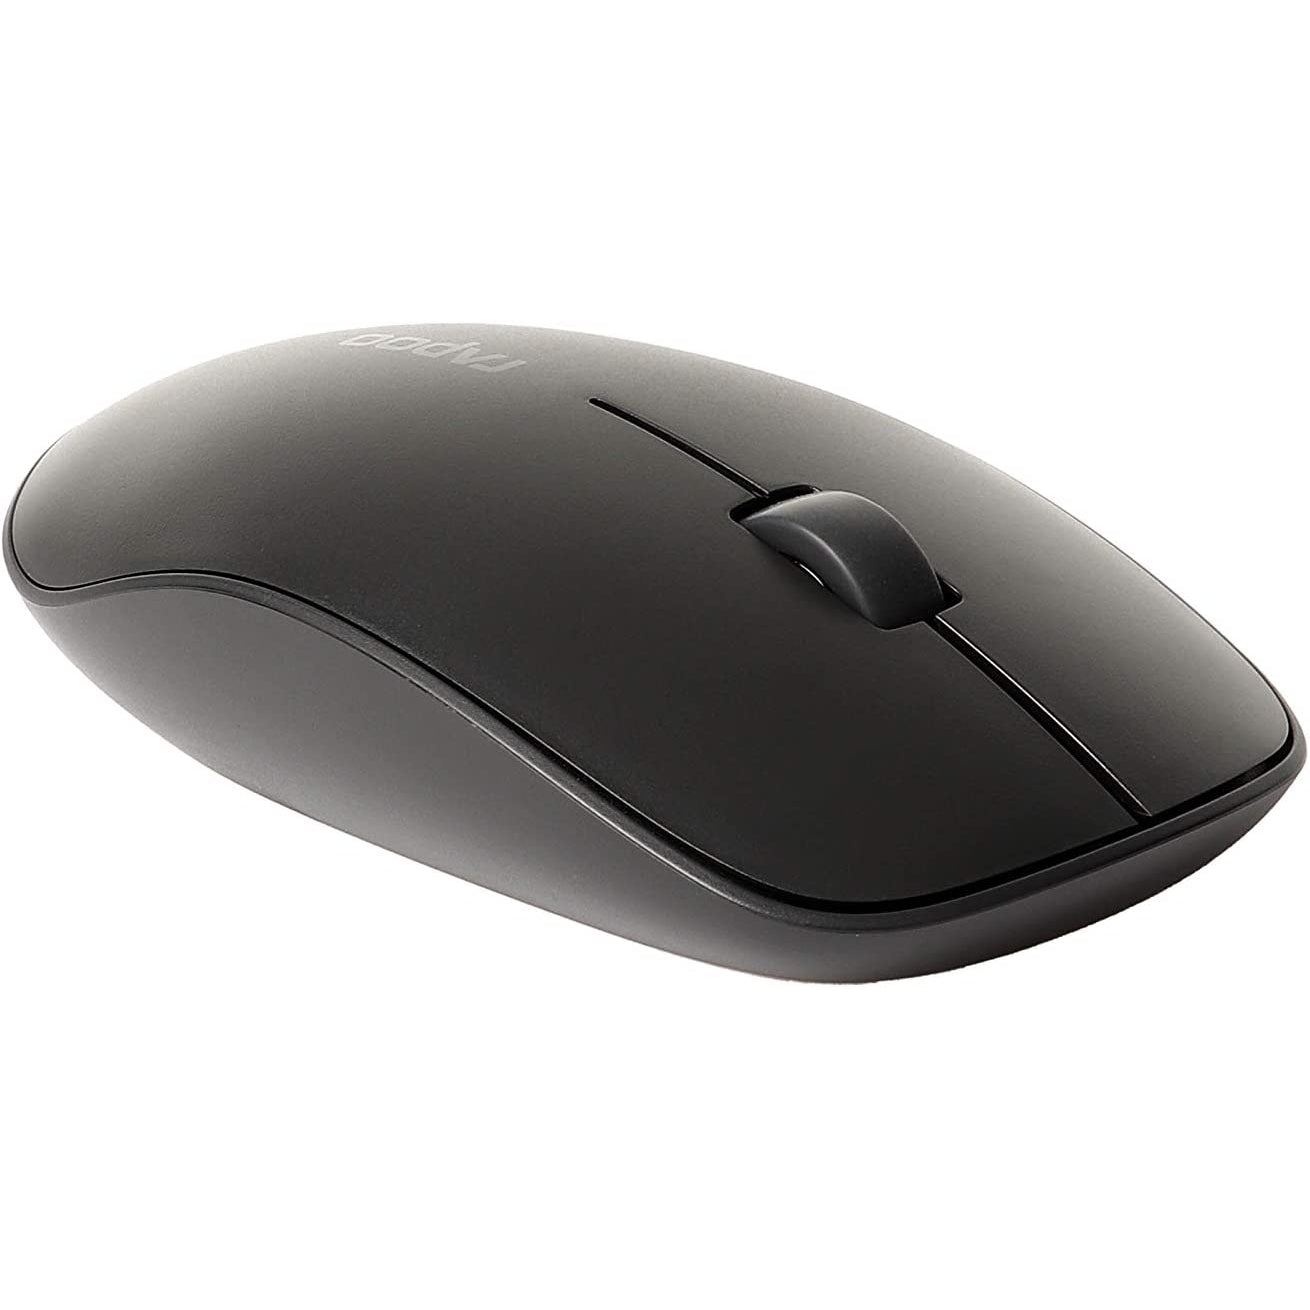 Rapoo M200 Silent Wireless Mouse - Black - Refurbished Excellent